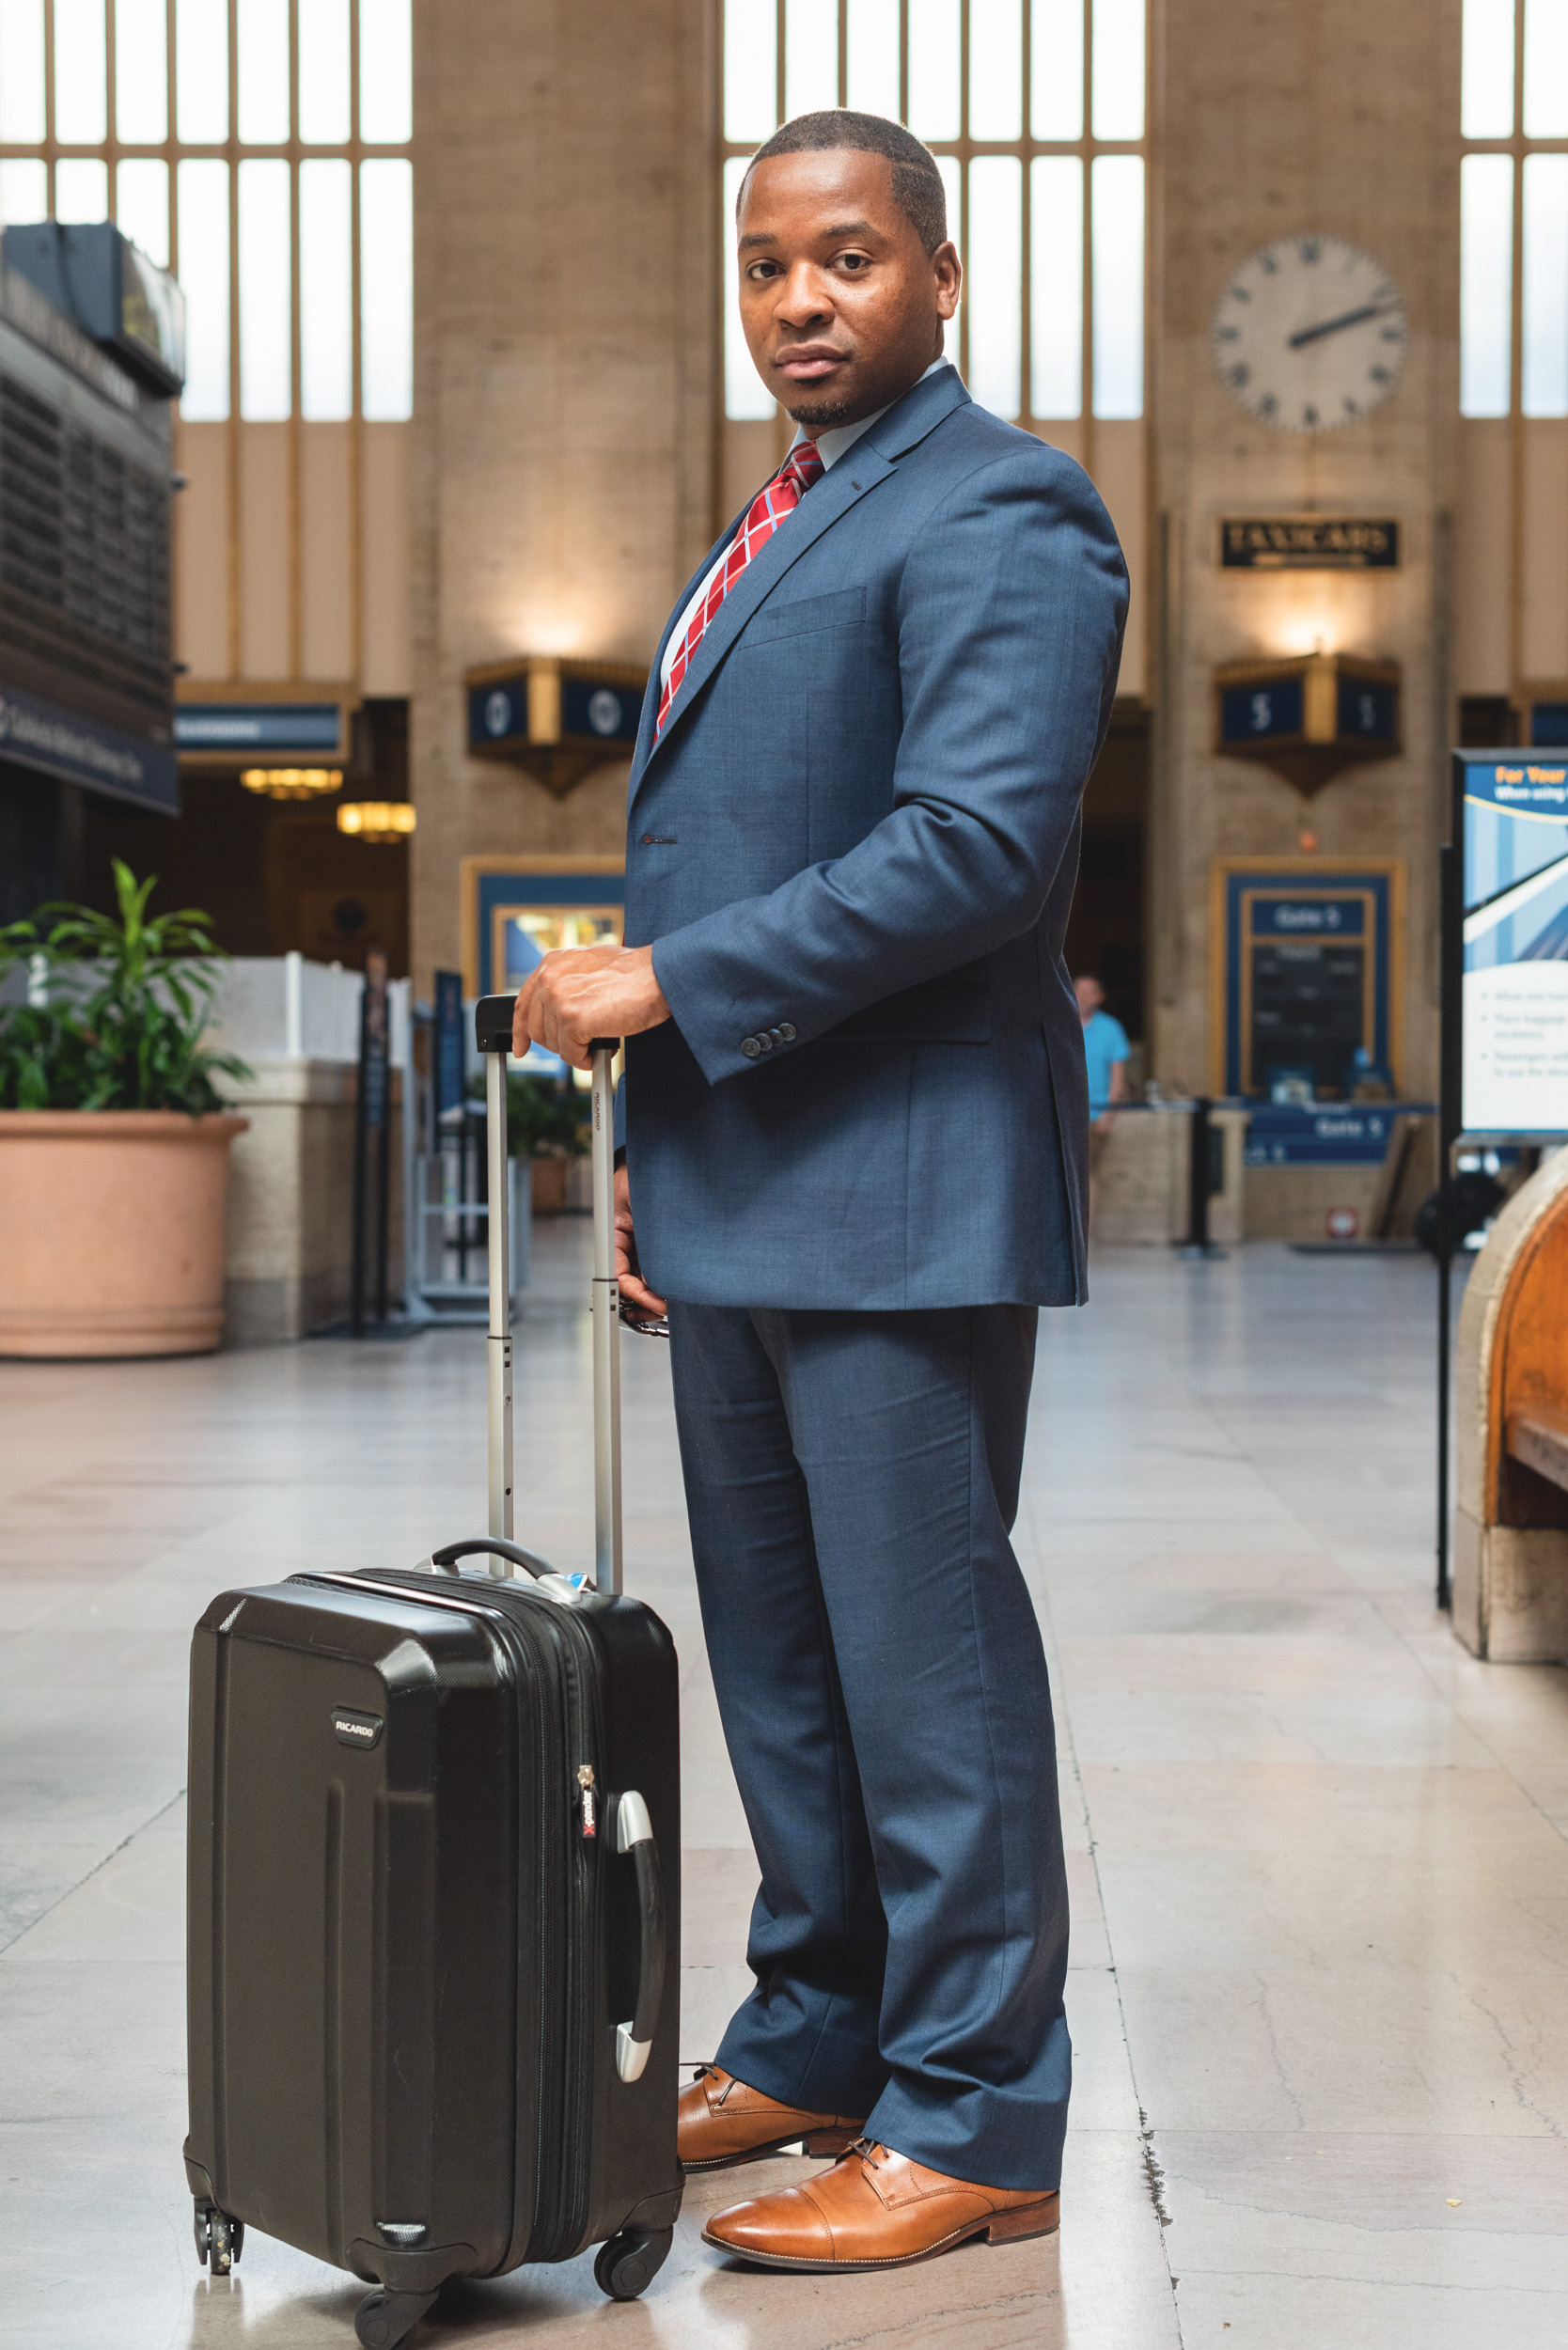 A-GENTLEMAN-COMMUTER-POSES-FOR-AN-EDITORIAL-PORTRAIT-FOR-THE-AMTRAK-THE-NATIONAL-MAGAZINE